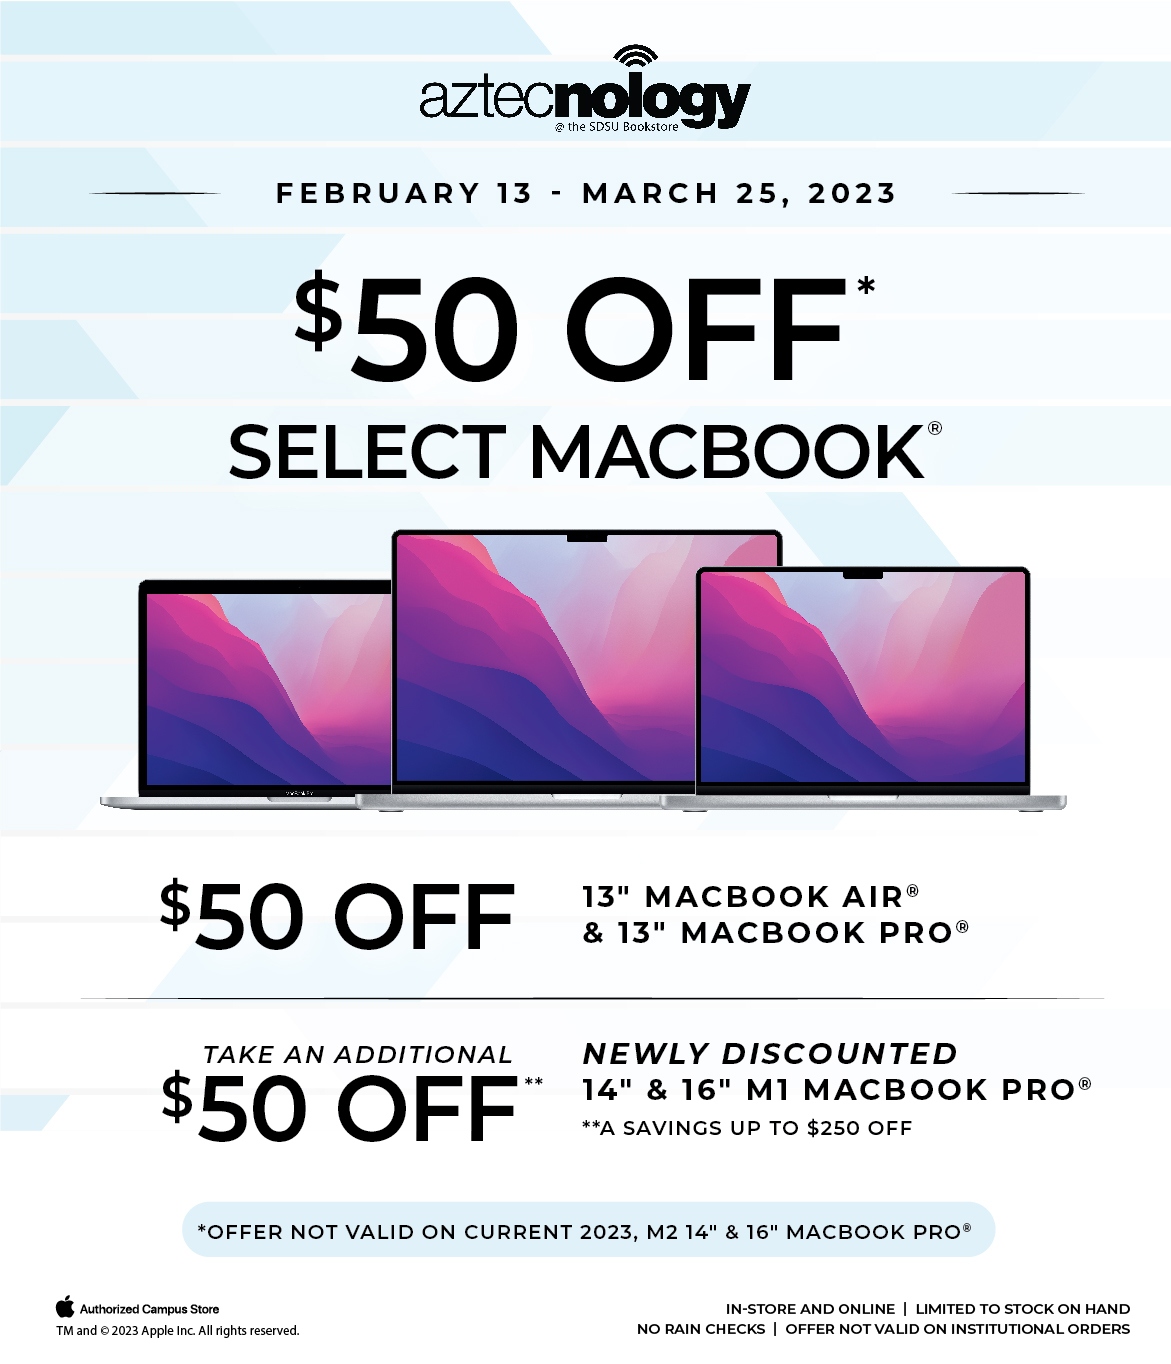 $50 off select macbook. Take an additional $50 off newly discounted 14 inch and 16 inch M1 Macbook Pro.